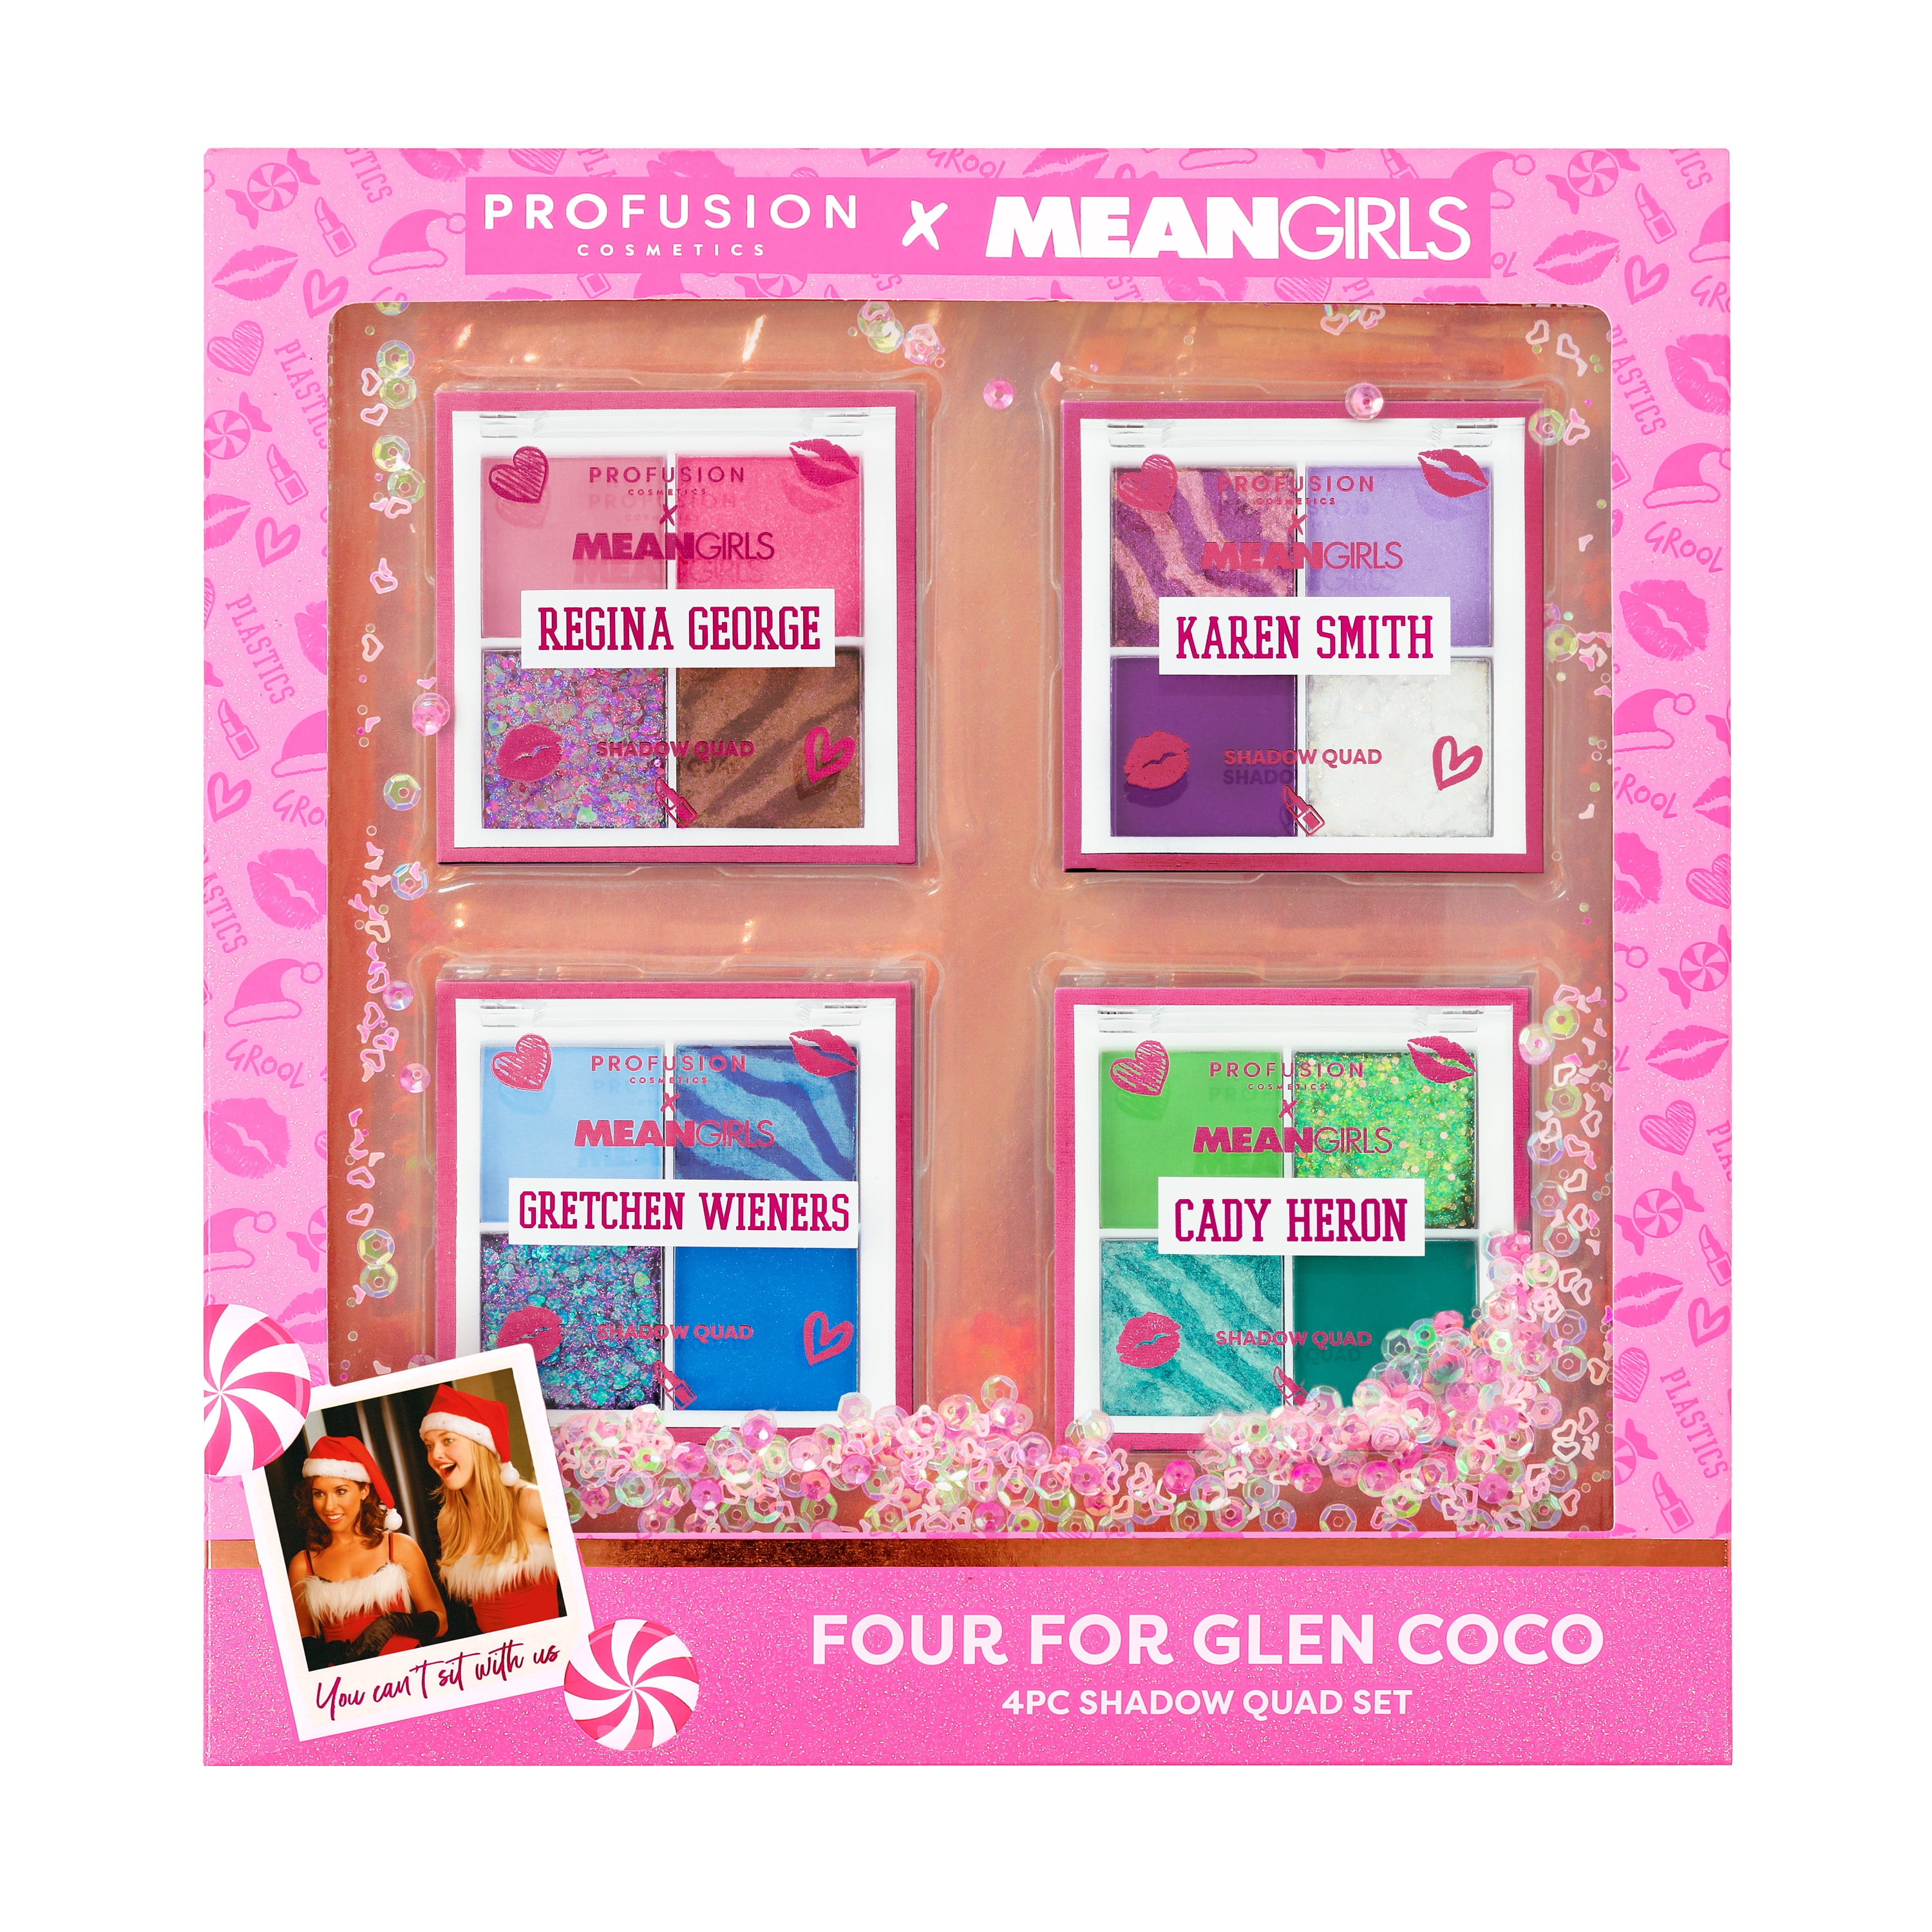 you go glen coco mean girls personalised greeting card congratulations 